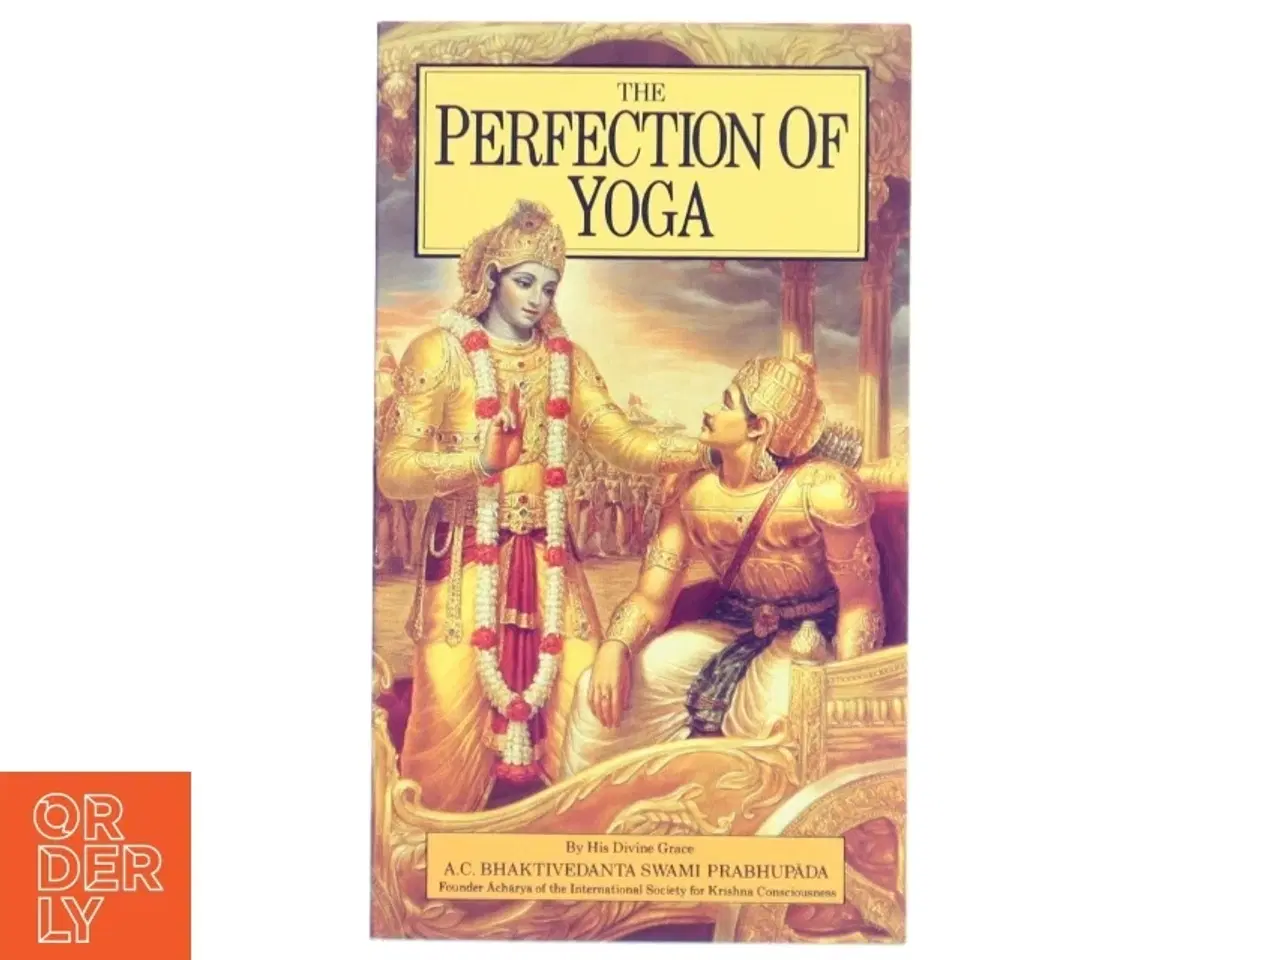 Billede 1 - The perfection of yoga